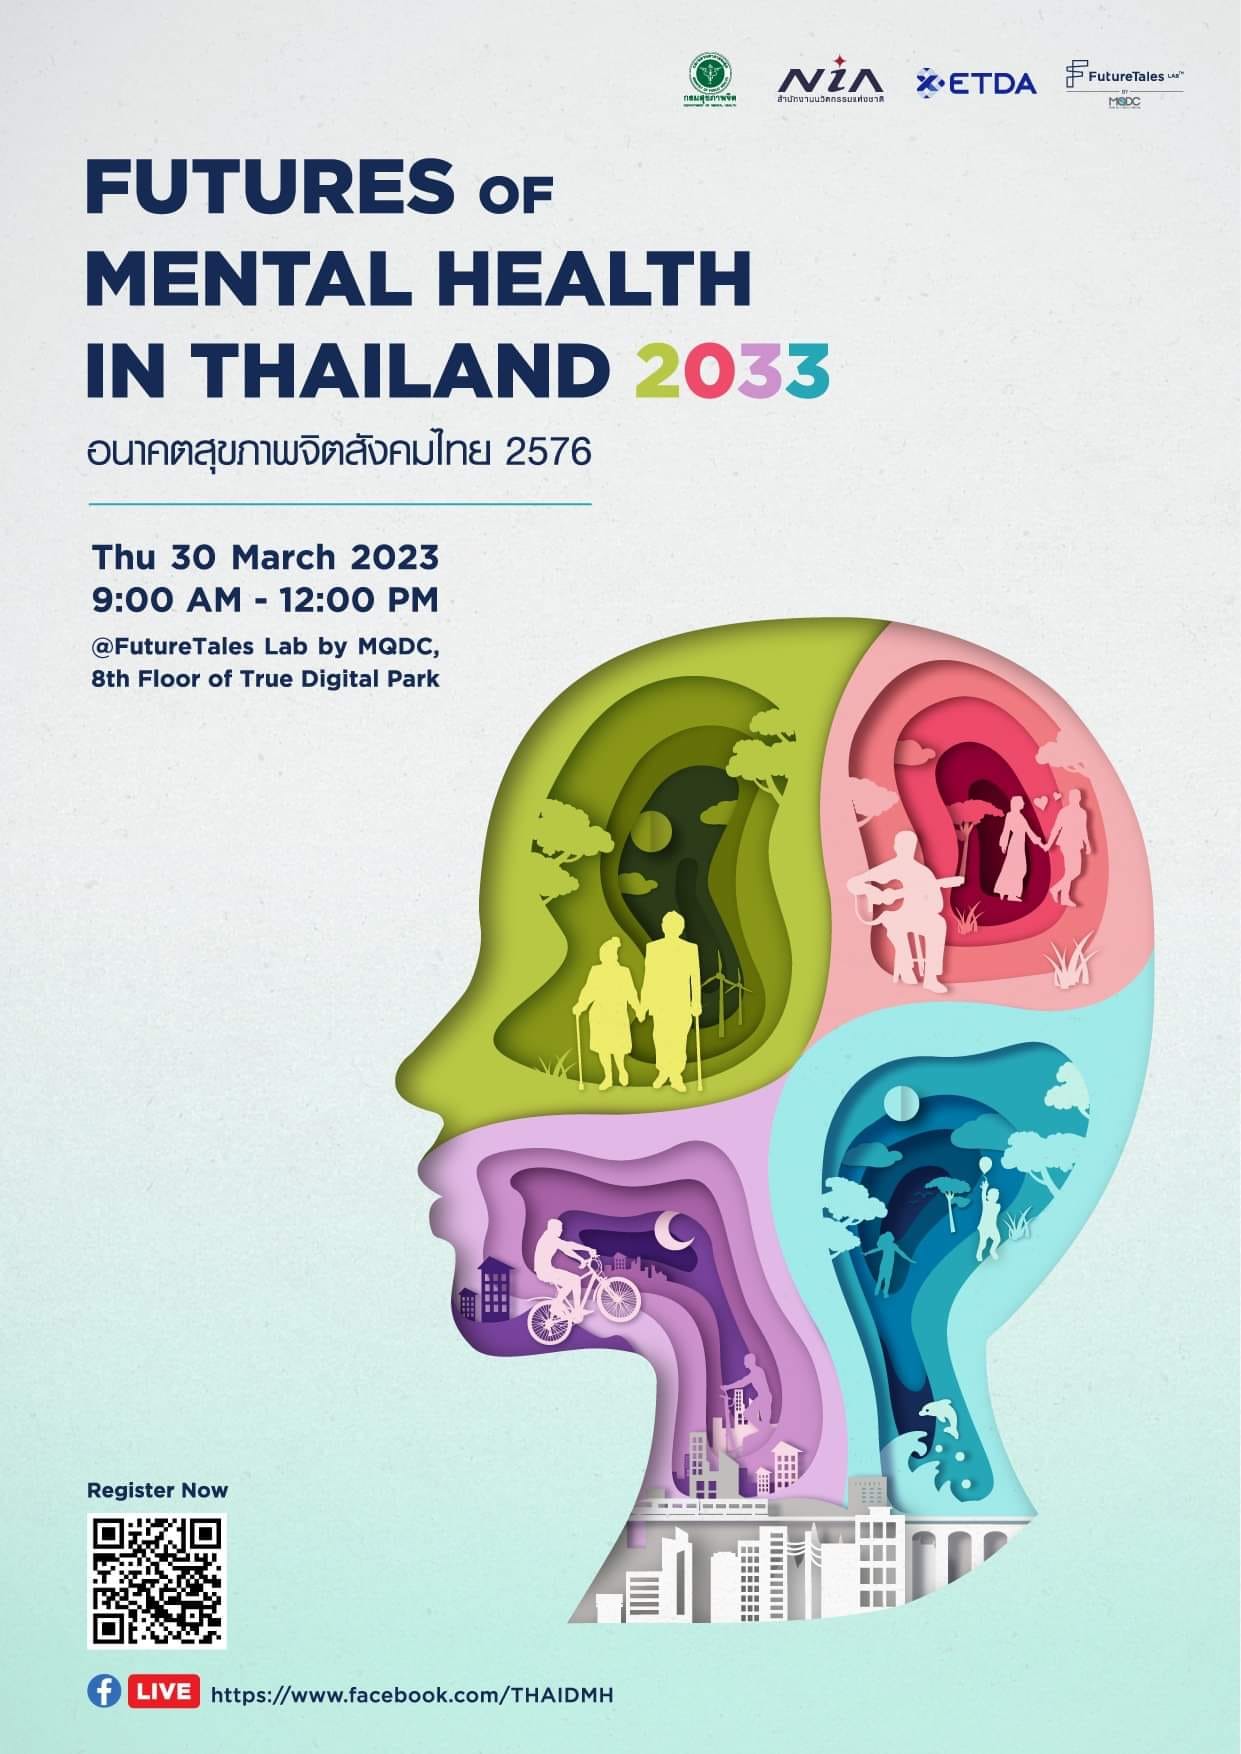 Futures of Mental Health in Thailand 2033